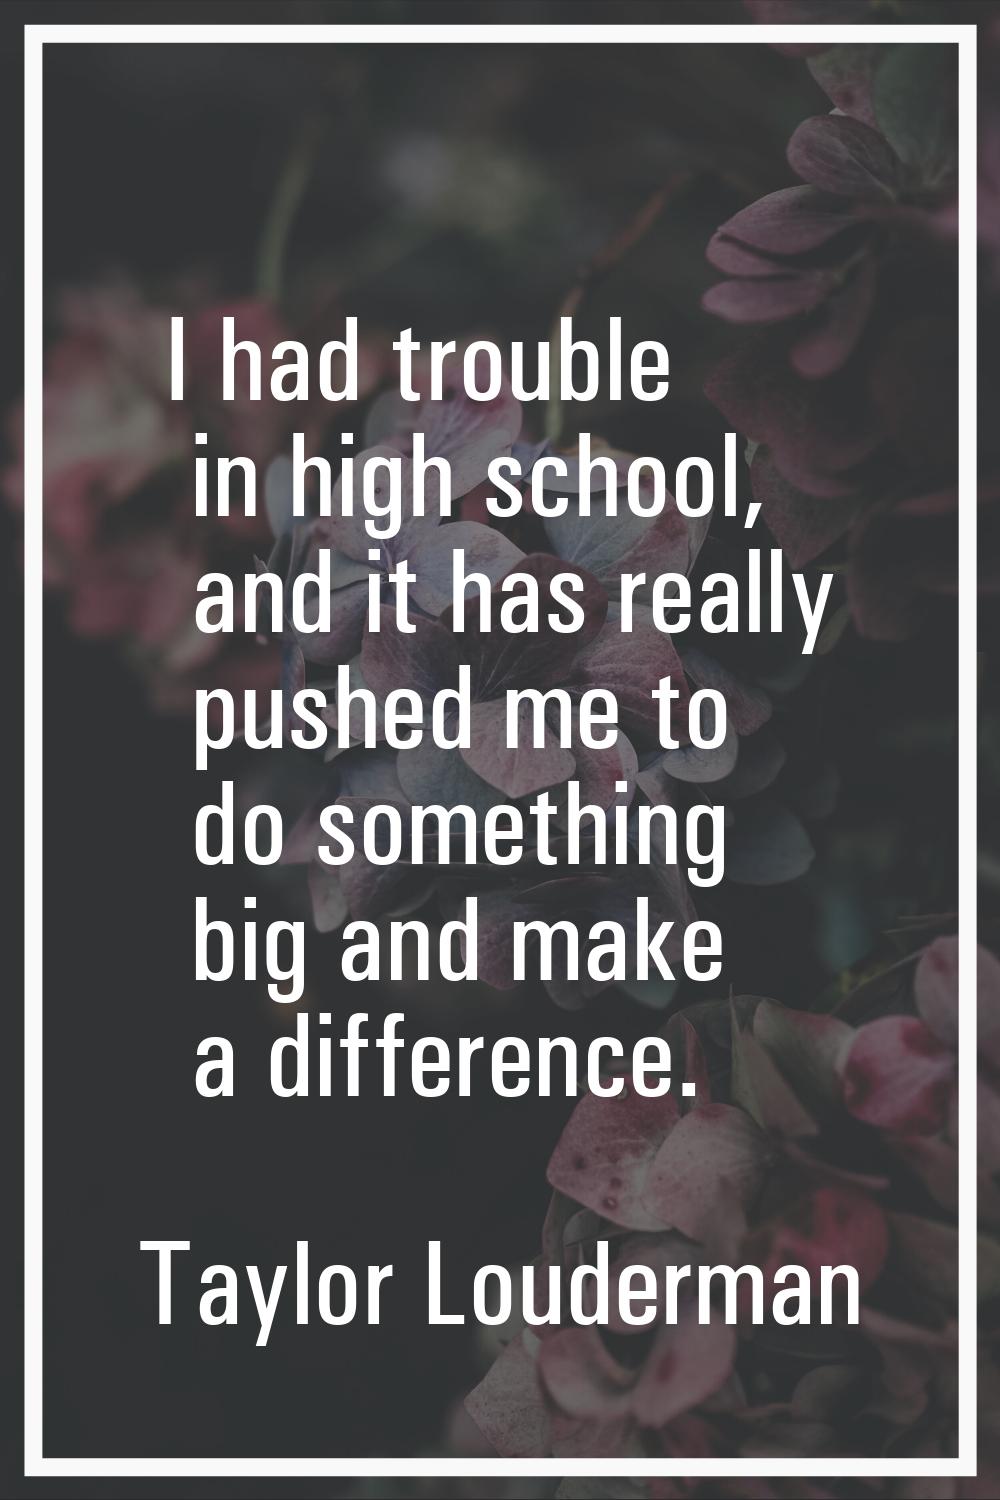 I had trouble in high school, and it has really pushed me to do something big and make a difference